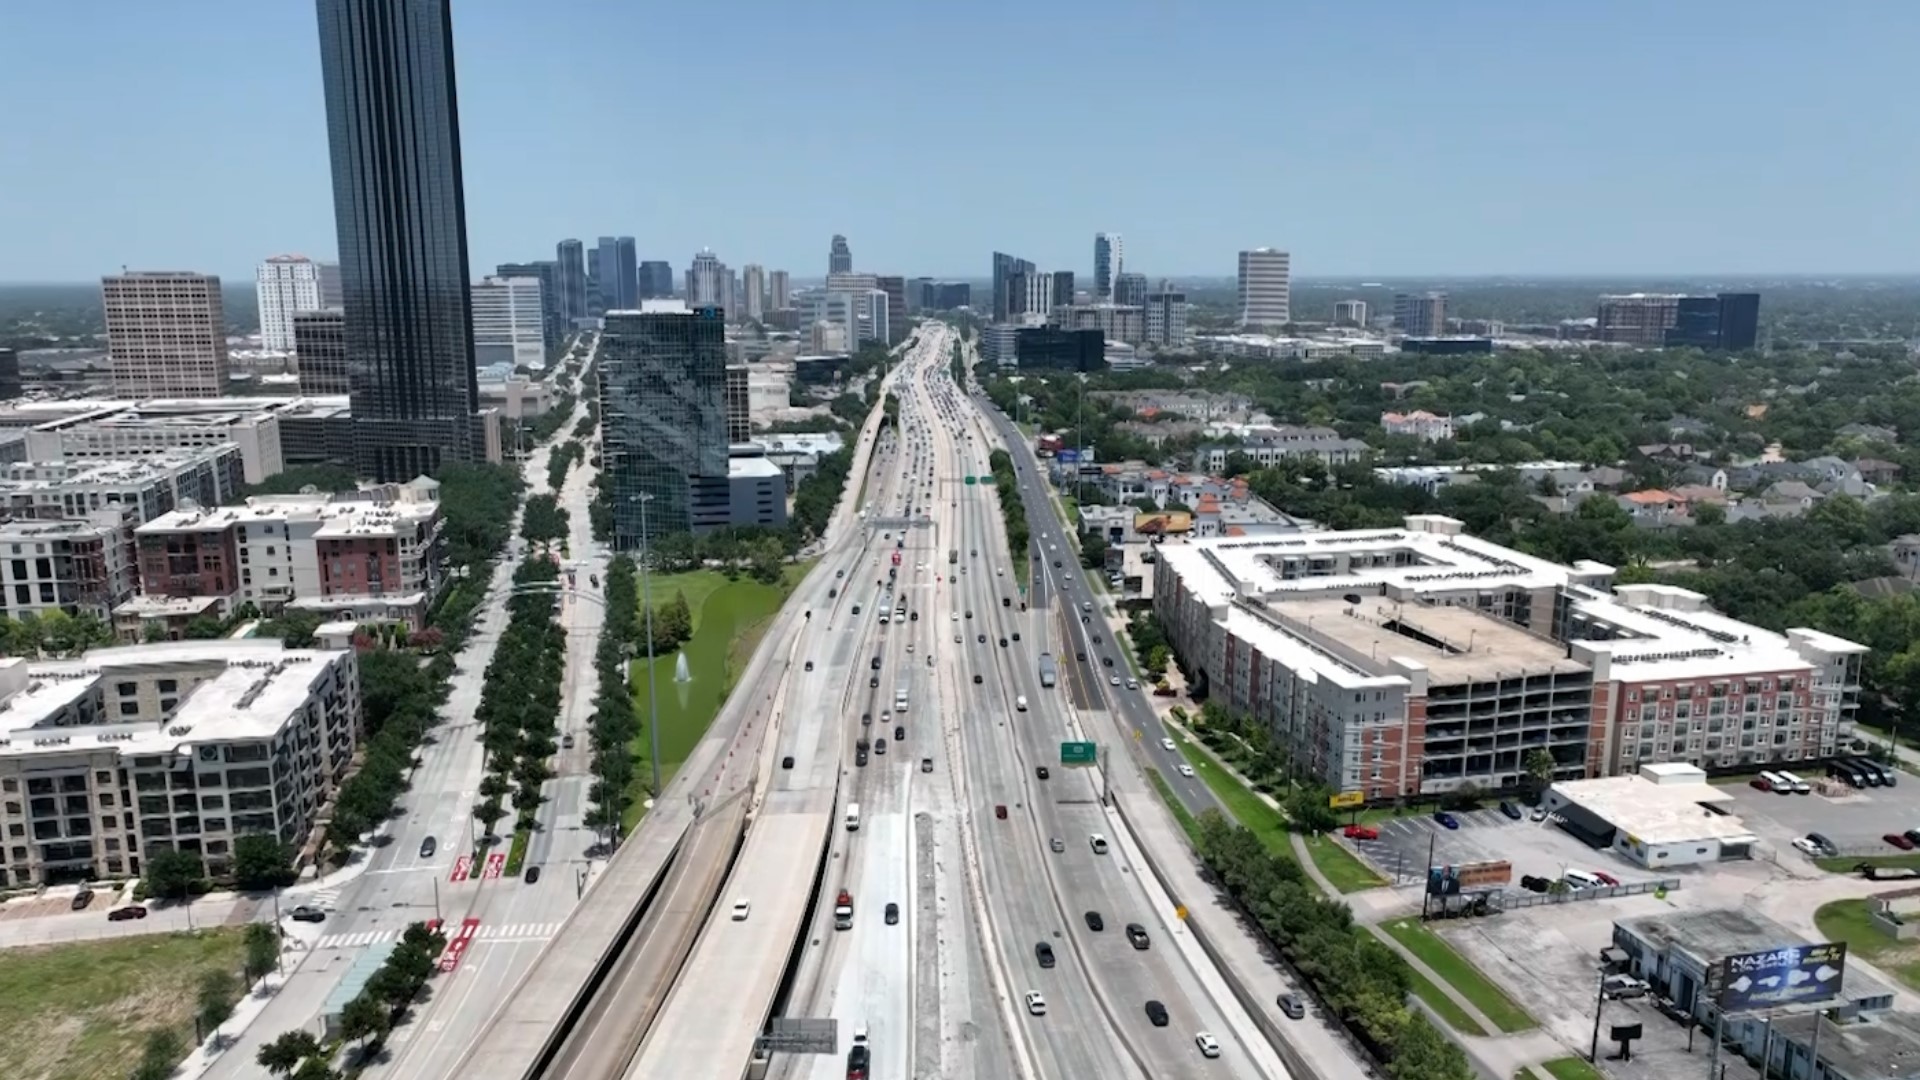 Two miles of roadwork has meant five years of slowdowns and detours along the West Loop and Southwest Freeway.